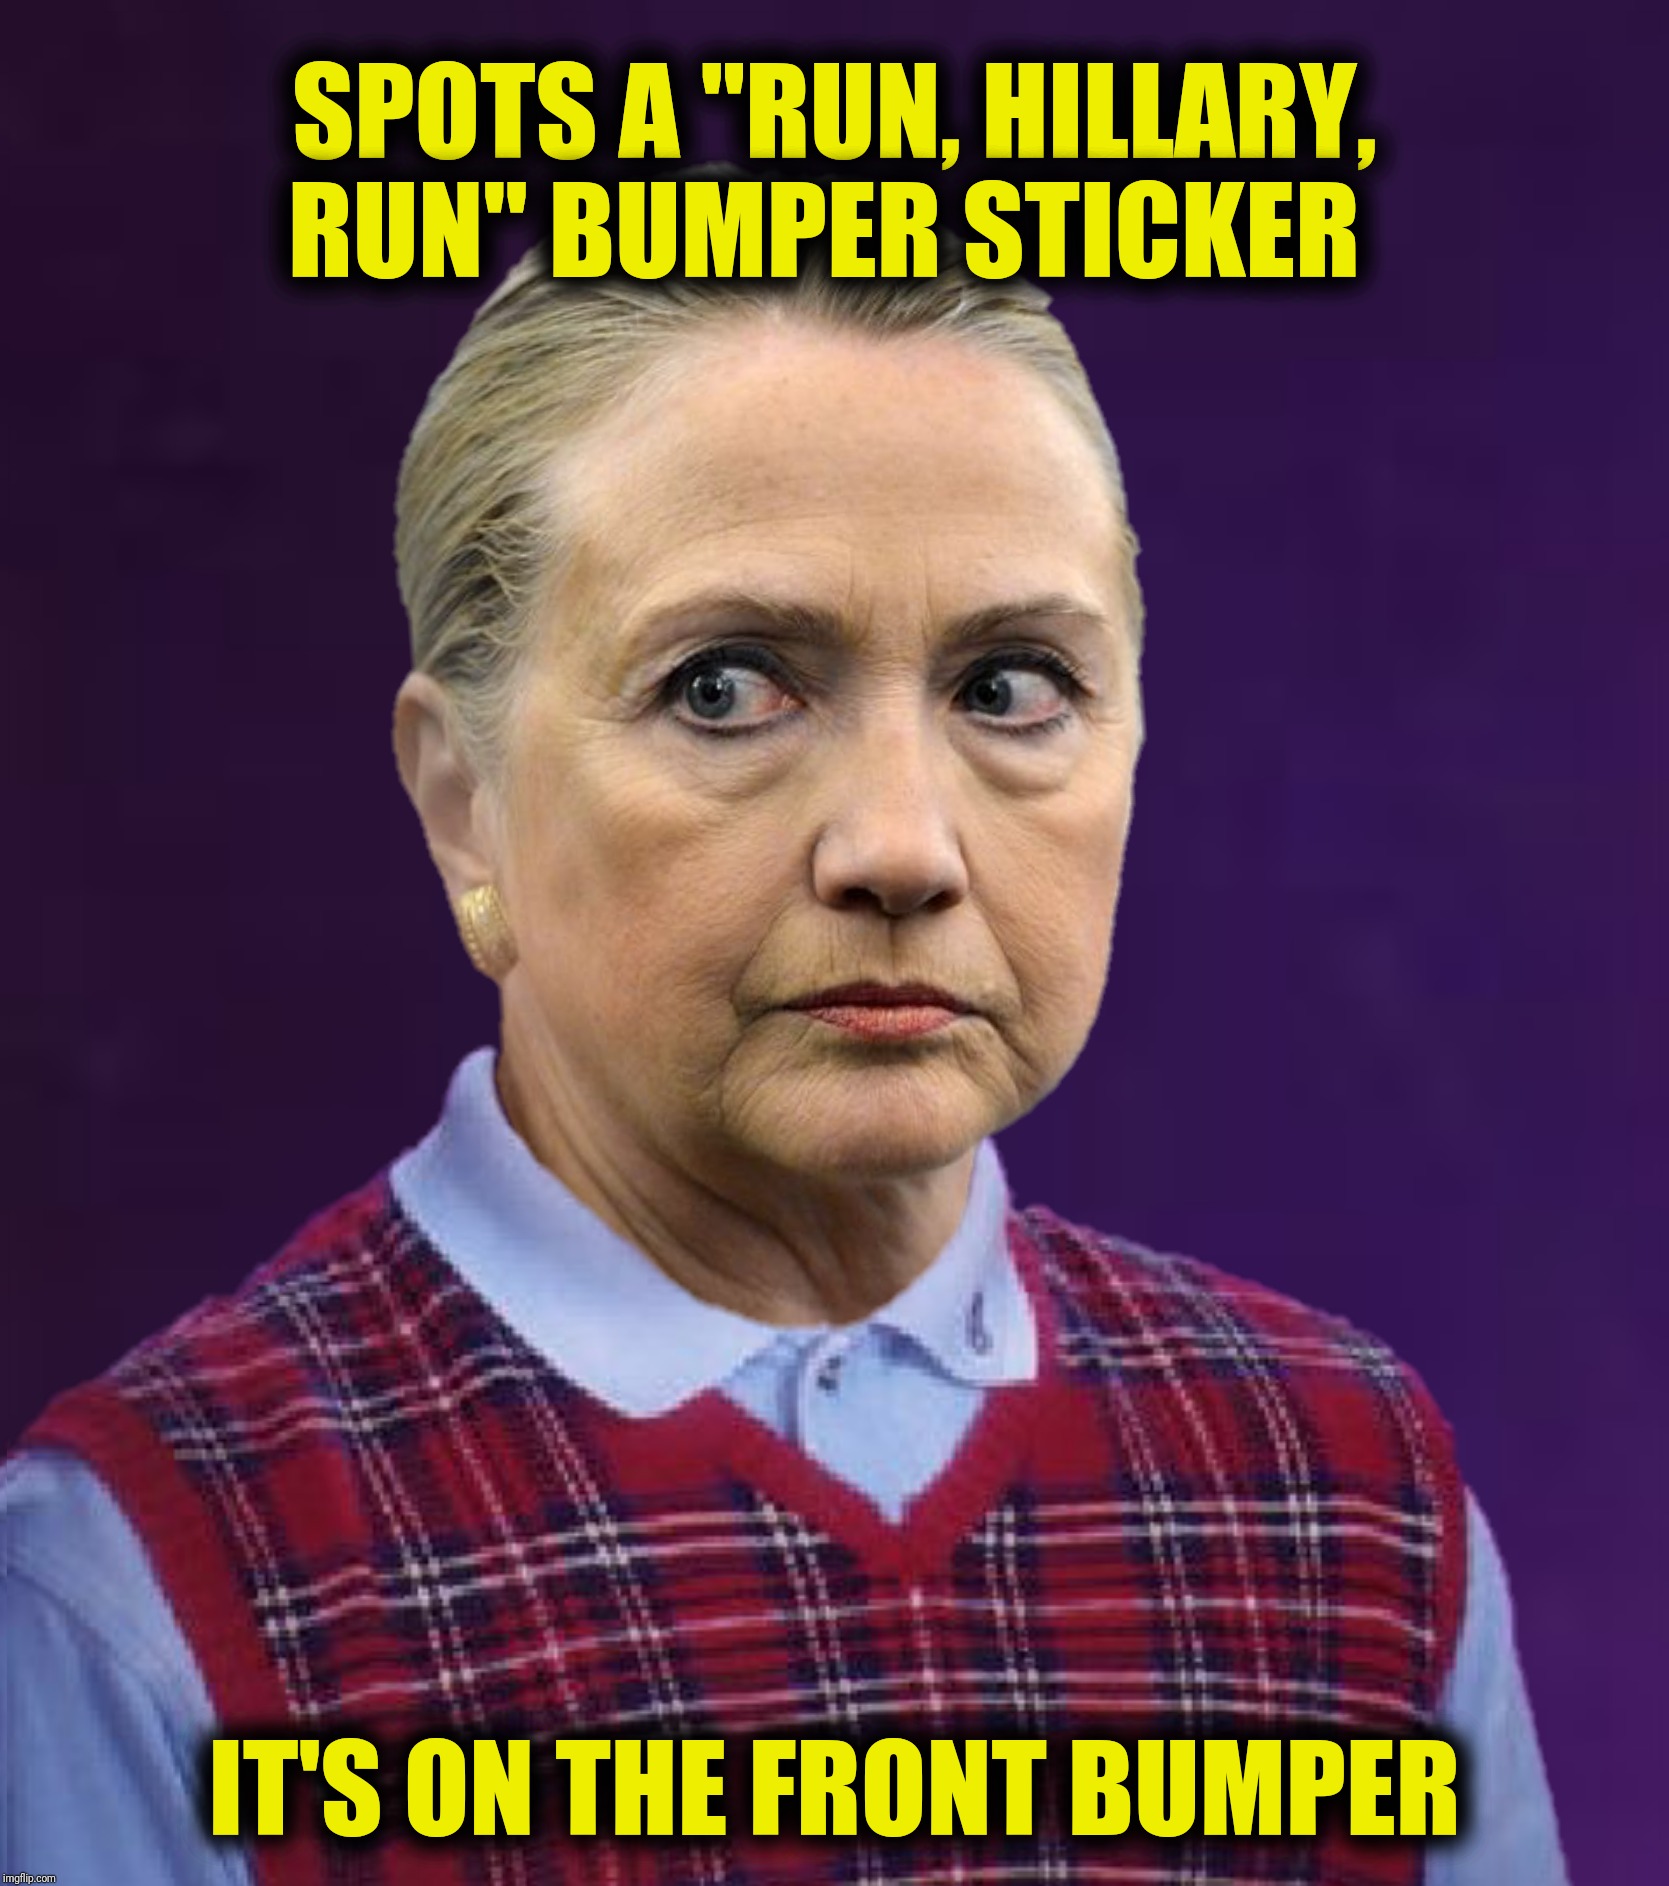 The face you make when you're given a thirty second head start | SPOTS A "RUN, HILLARY, RUN" BUMPER STICKER; IT'S ON THE FRONT BUMPER | image tagged in bad luck brian,bad luck hillary,run hillary run,bumper sticker | made w/ Imgflip meme maker